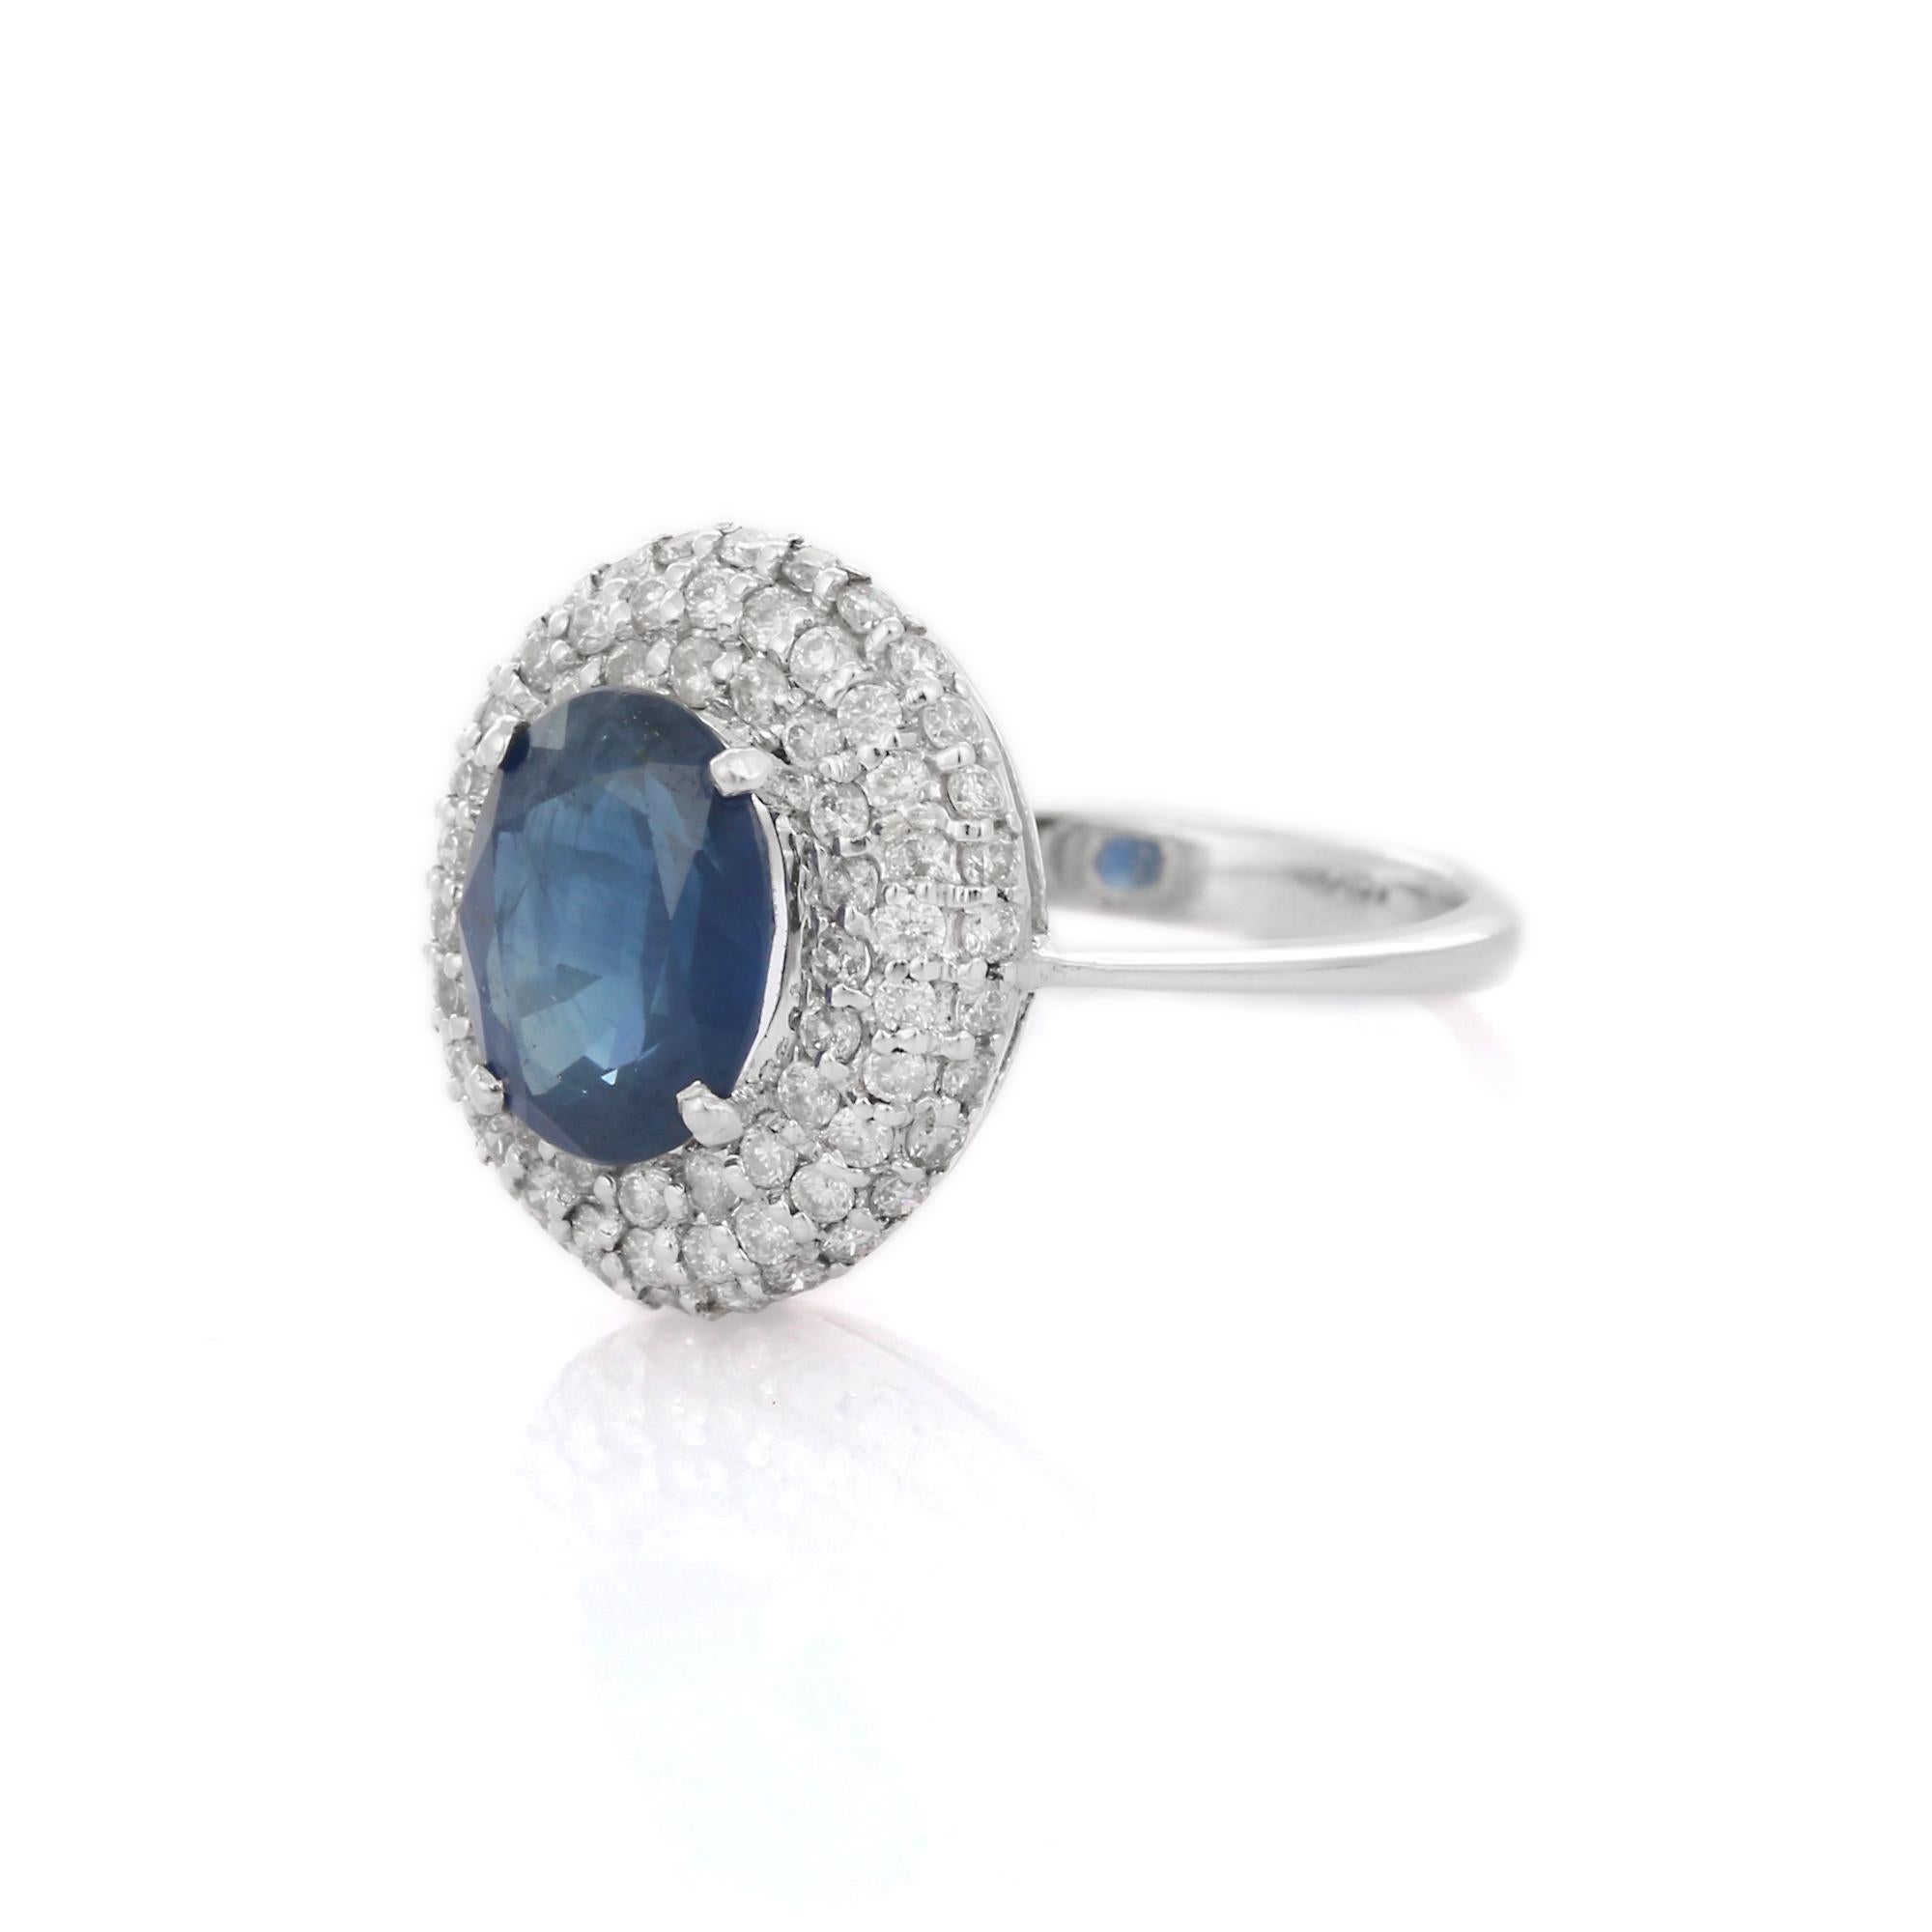 For Sale:  Blue Sapphire Diamond Big Round Cocktail Ring in 18K White Gold 2